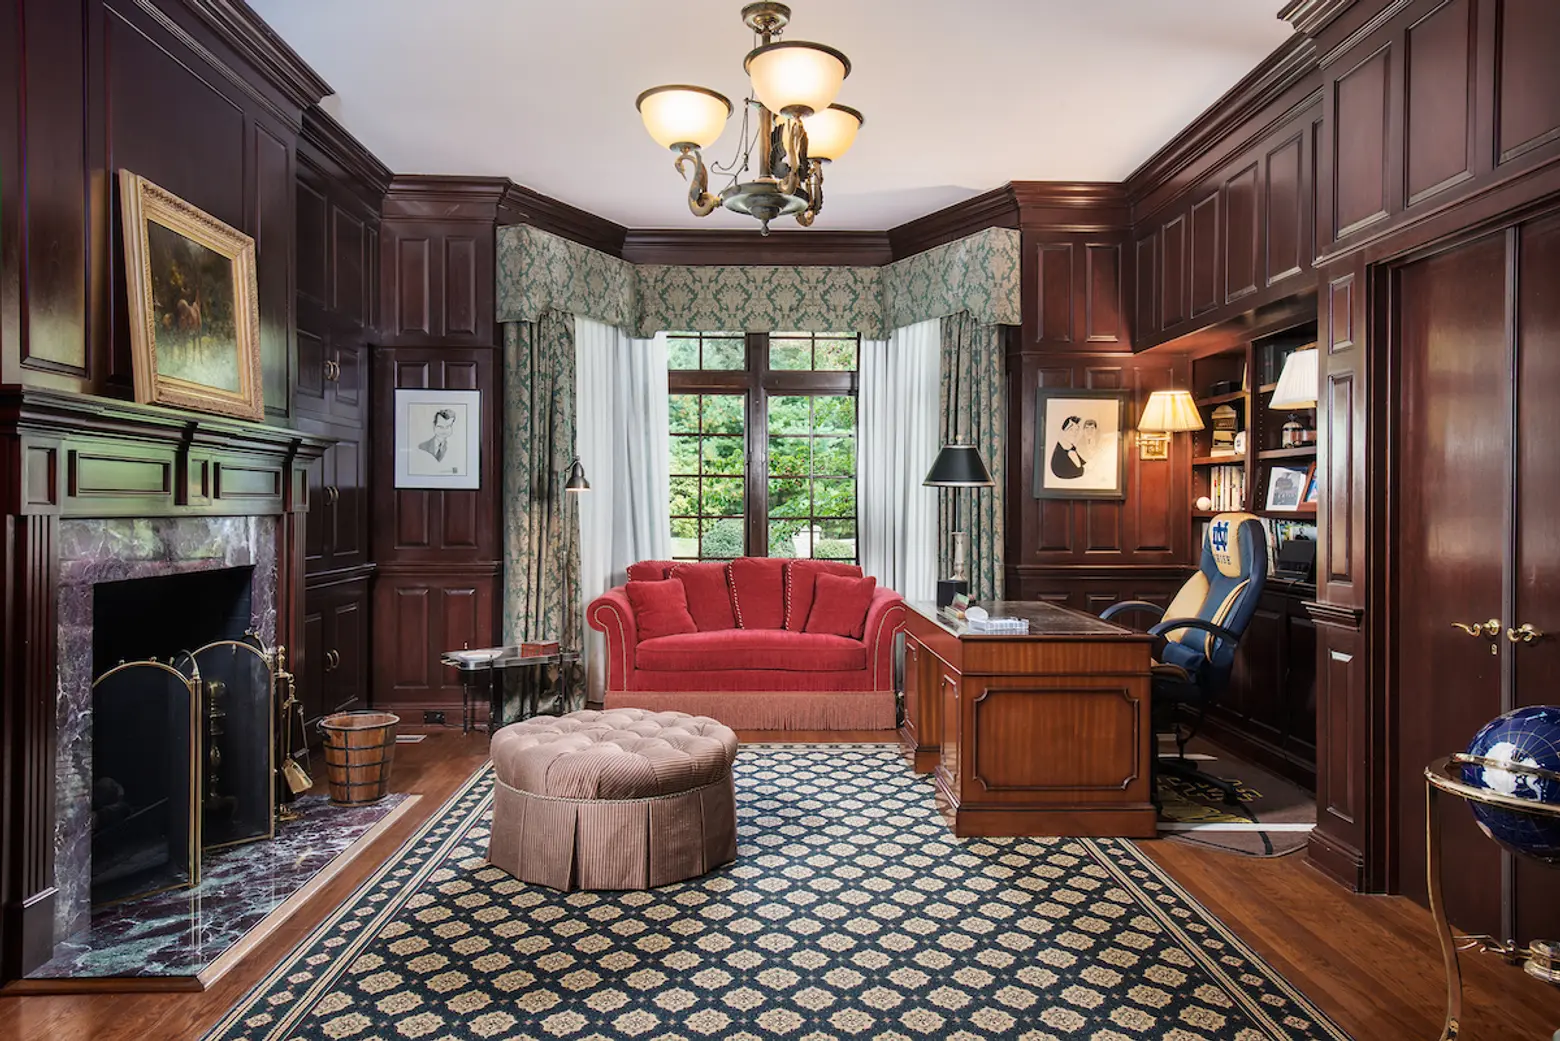 56 North Stanwich Road, greenwich, regis philbin, celebrities, cool listings, connecticut, pools